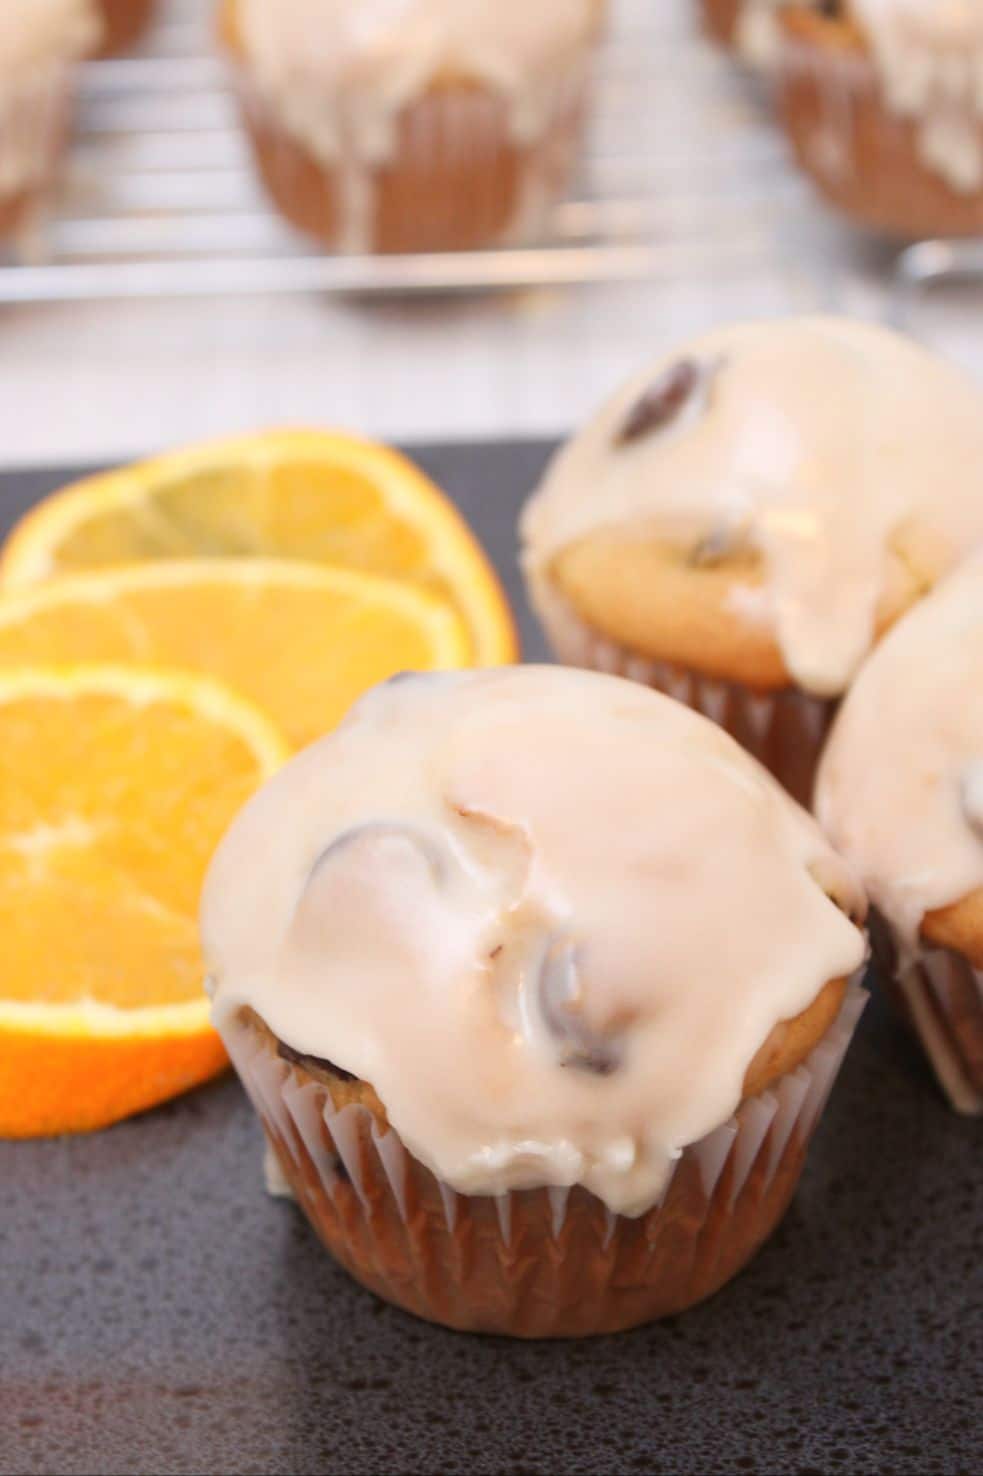 Glazed muffins served with orange slices. There are muffins cooling on a wire rack in the background